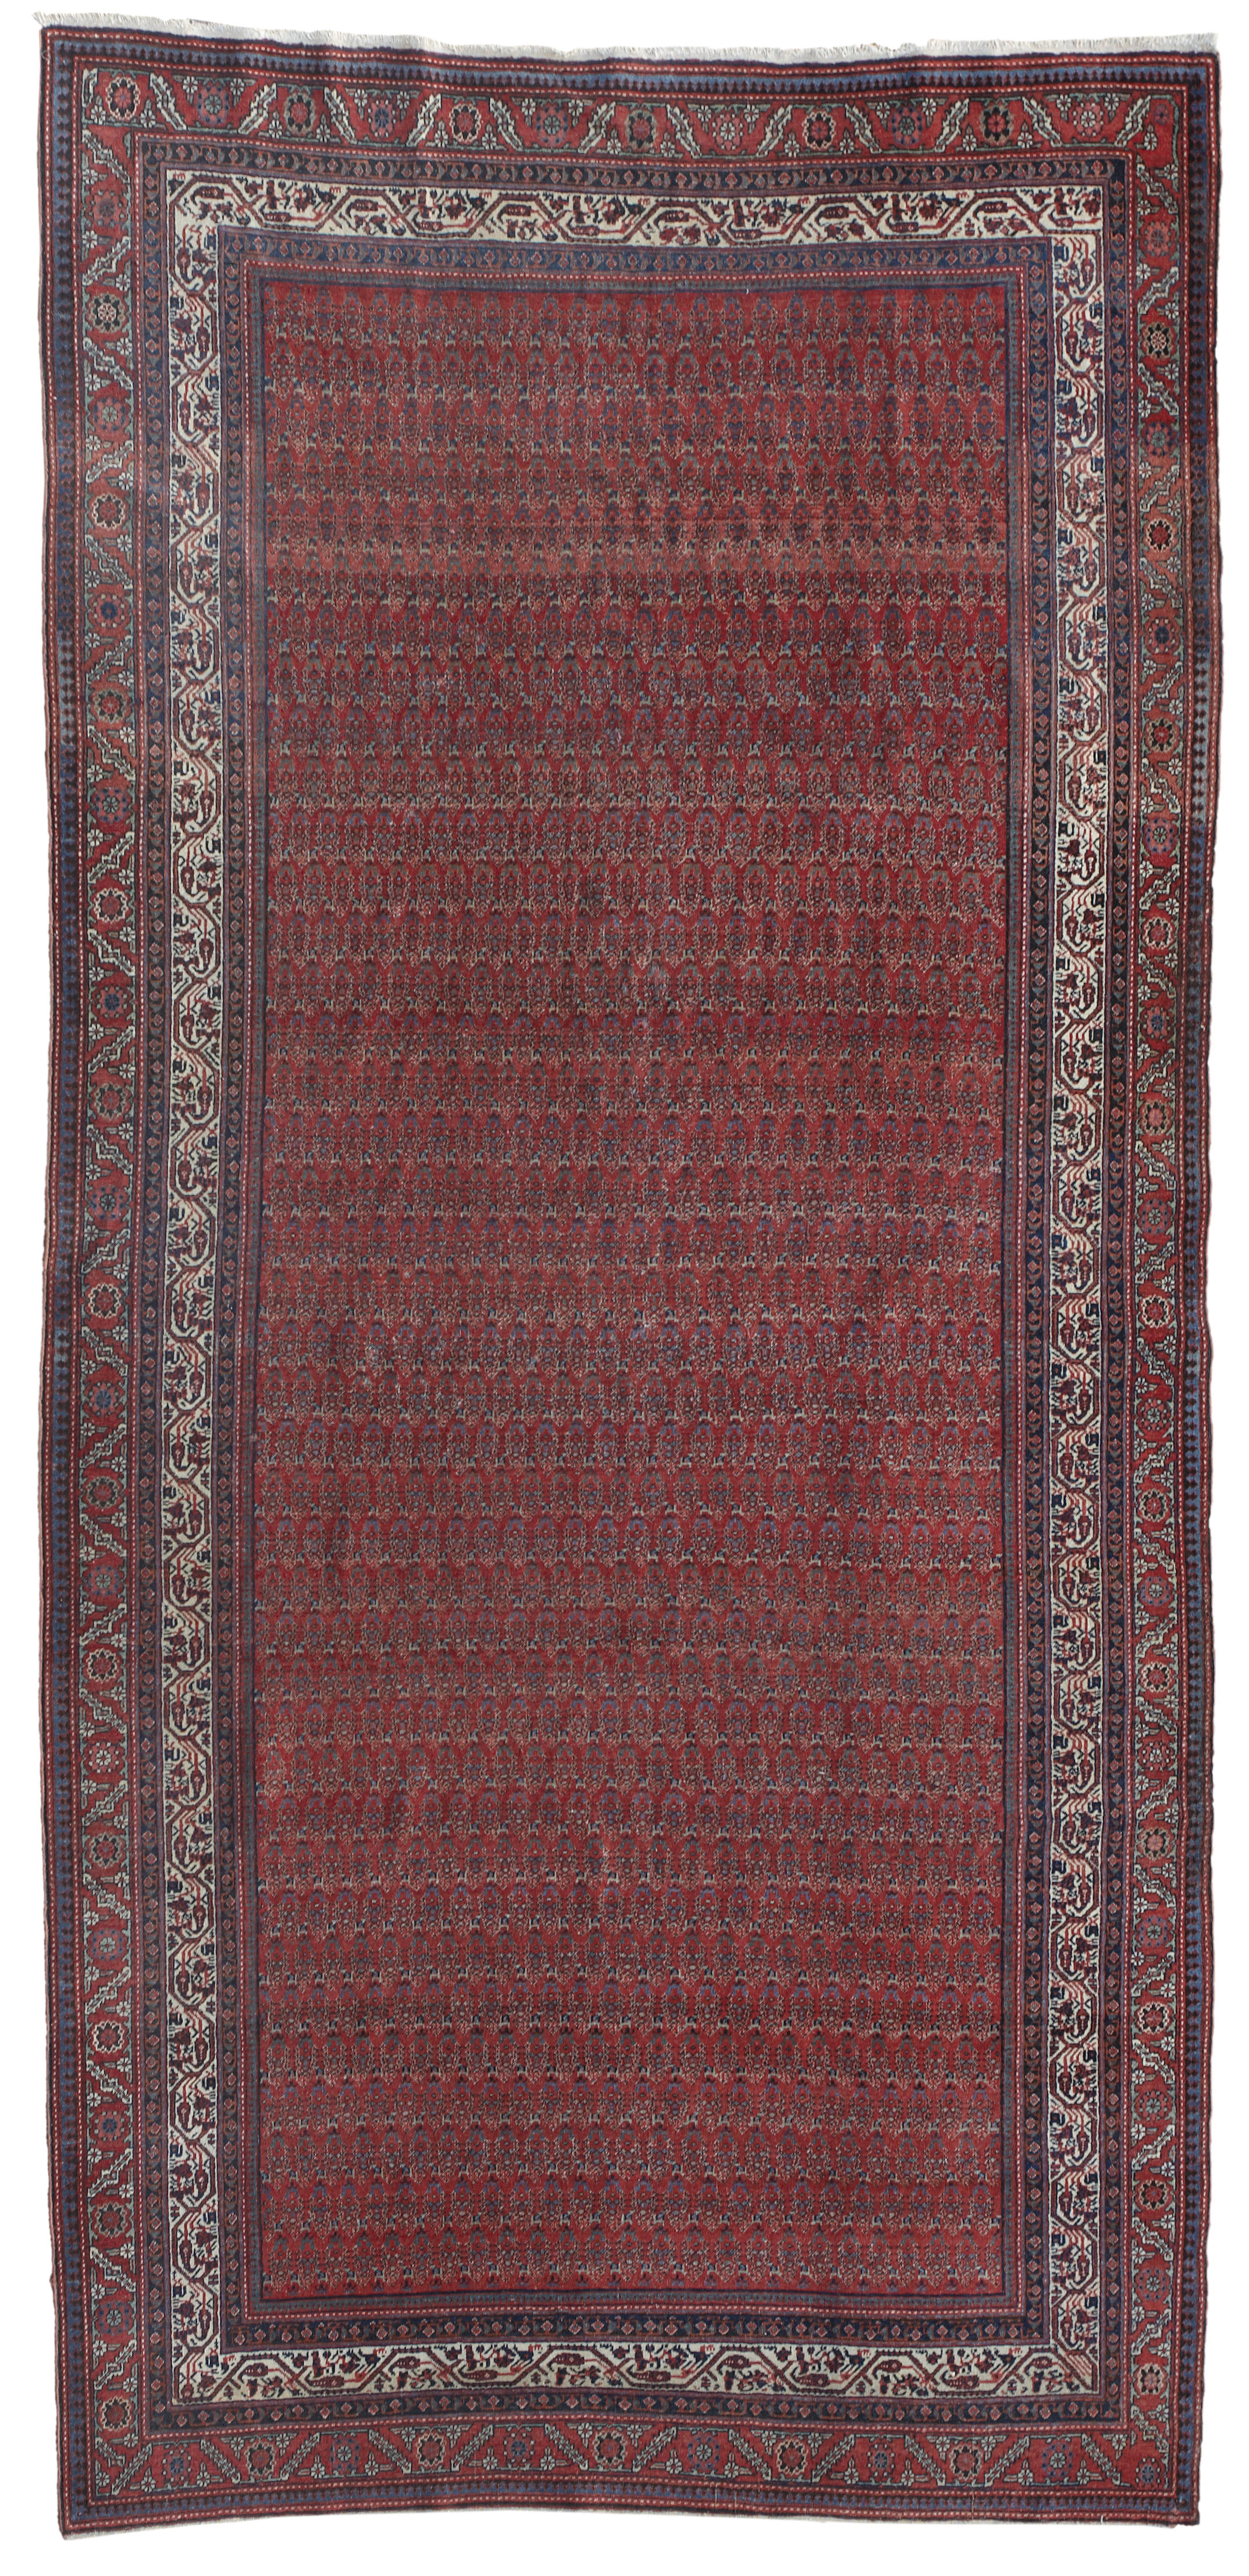 A Seraband runner size approximately 12917d